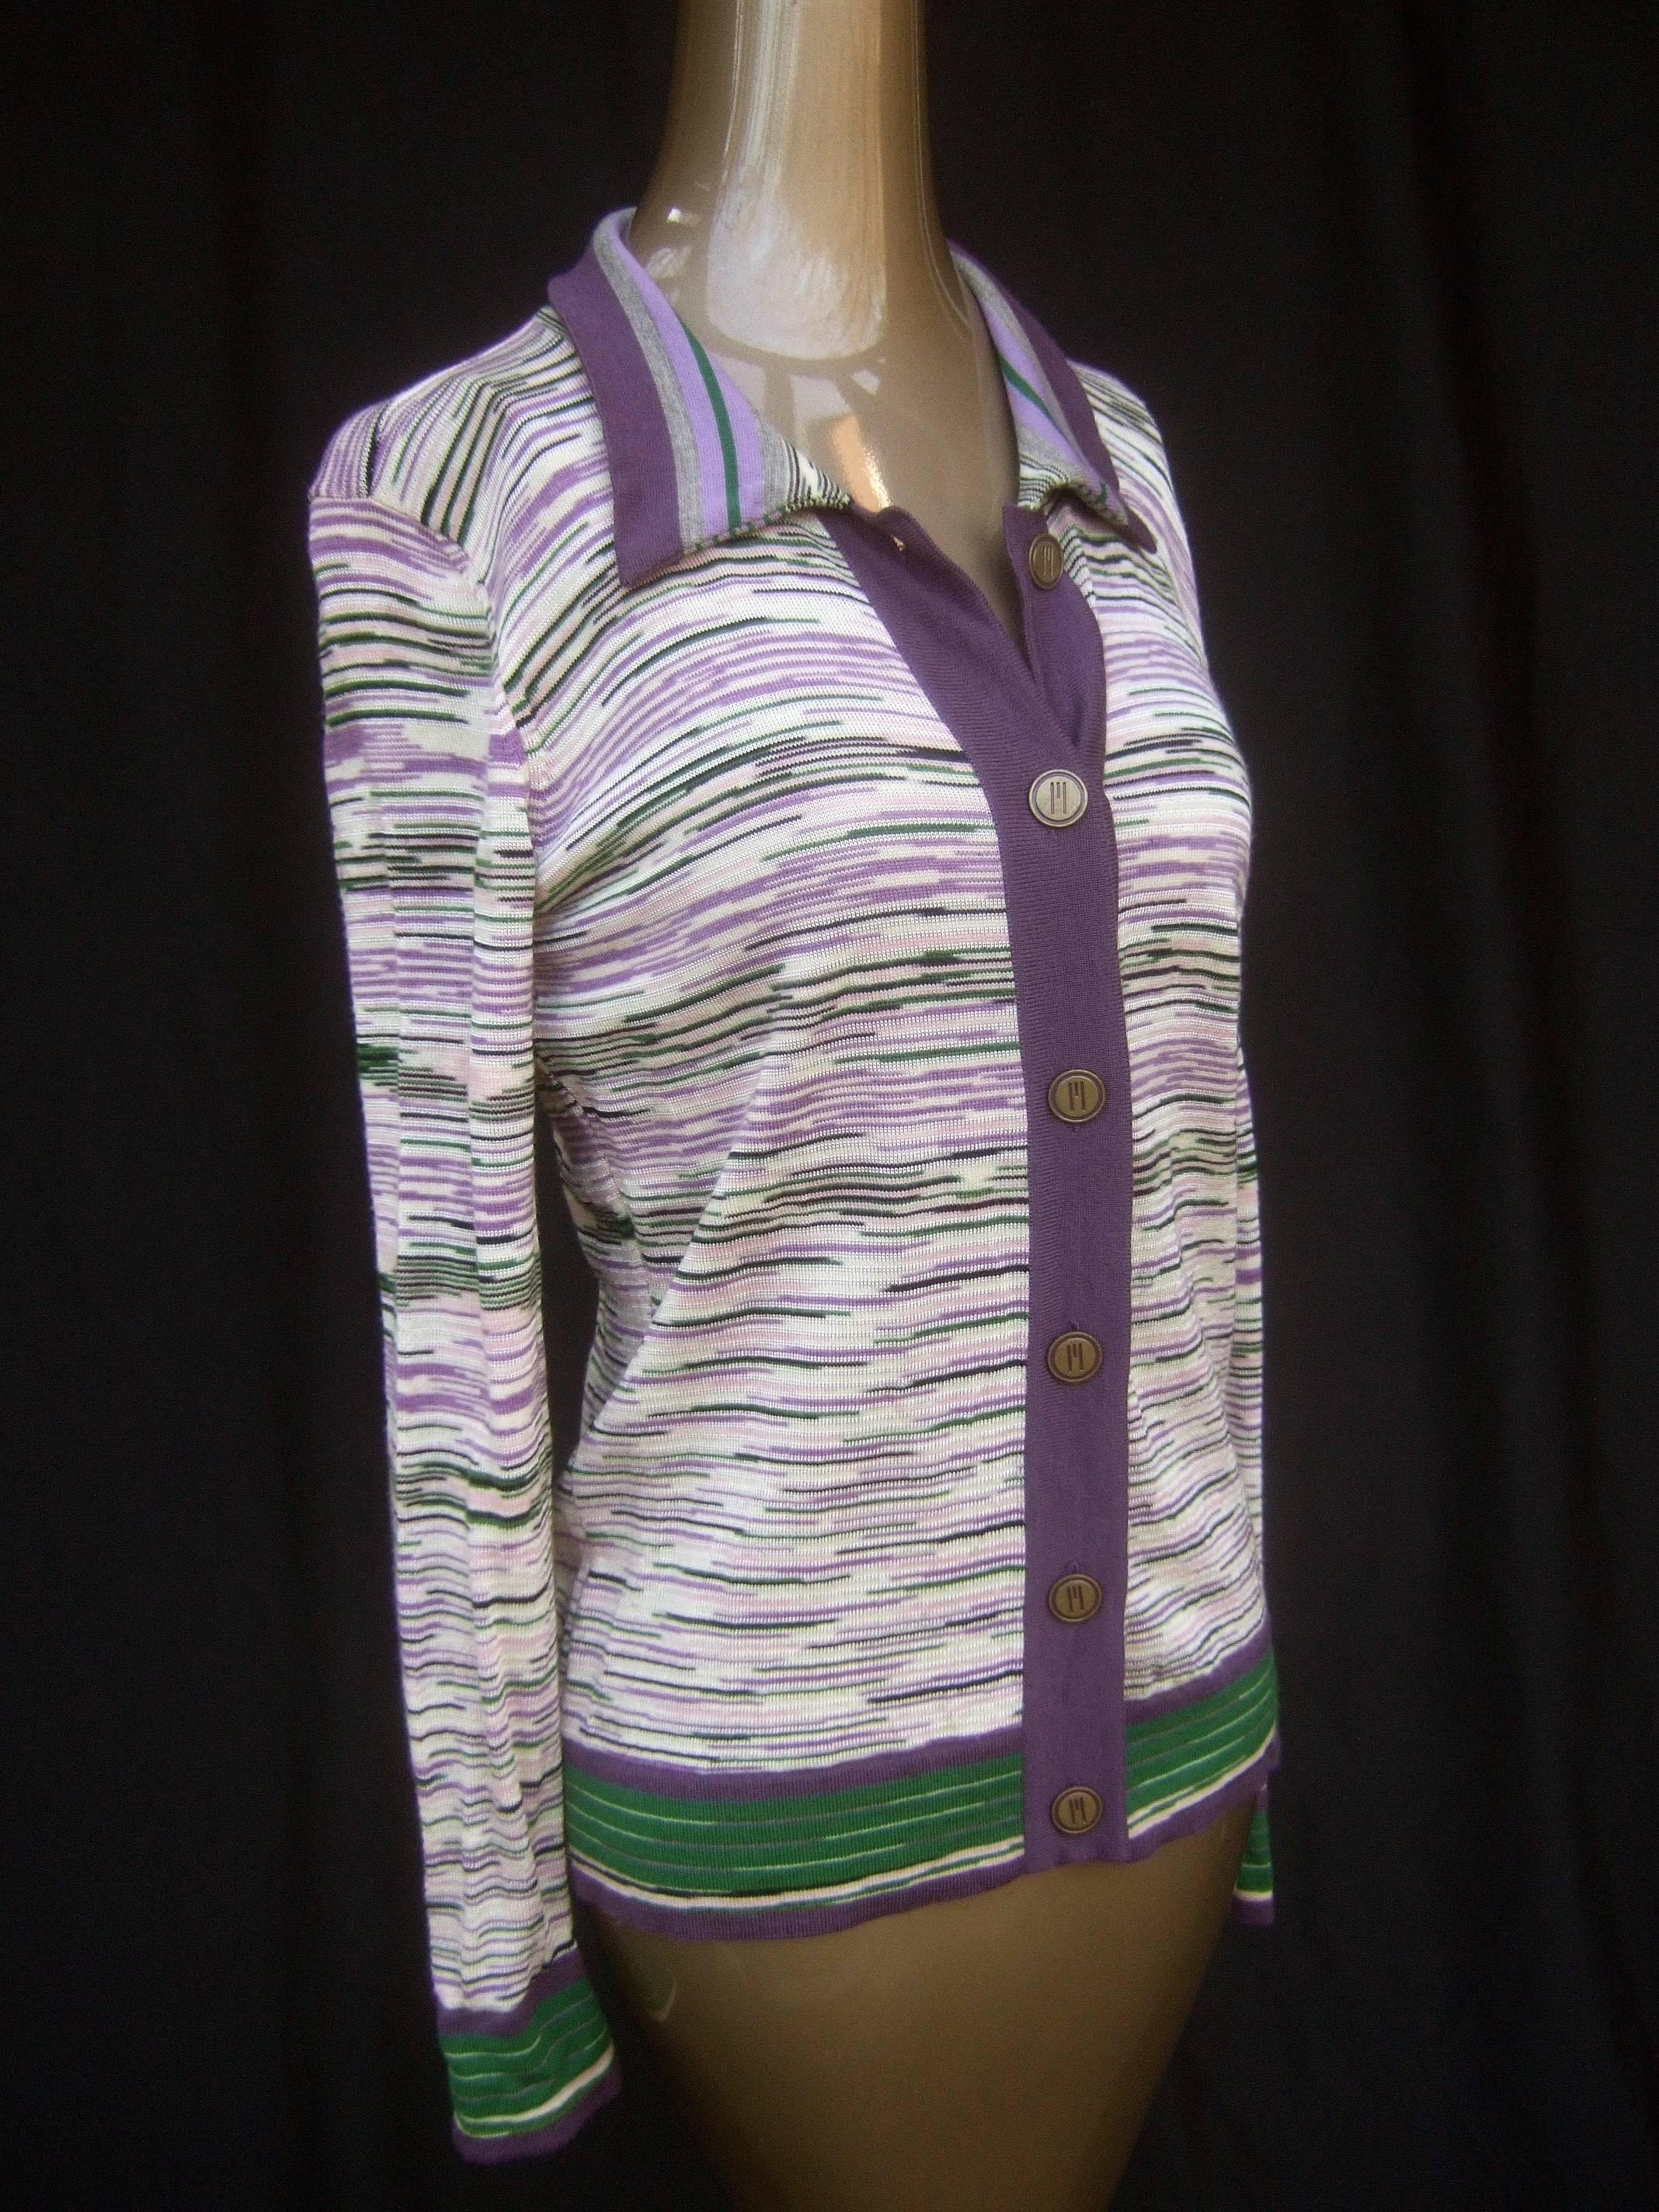 Missoni Italian striped wool knit cardigan 
The classic fine wool knit cardigan is designed 
with a series of horizontal stripes in various colors 

Buttons down the front with brass metal buttons 
inscribed with Missoni's M initial on each button